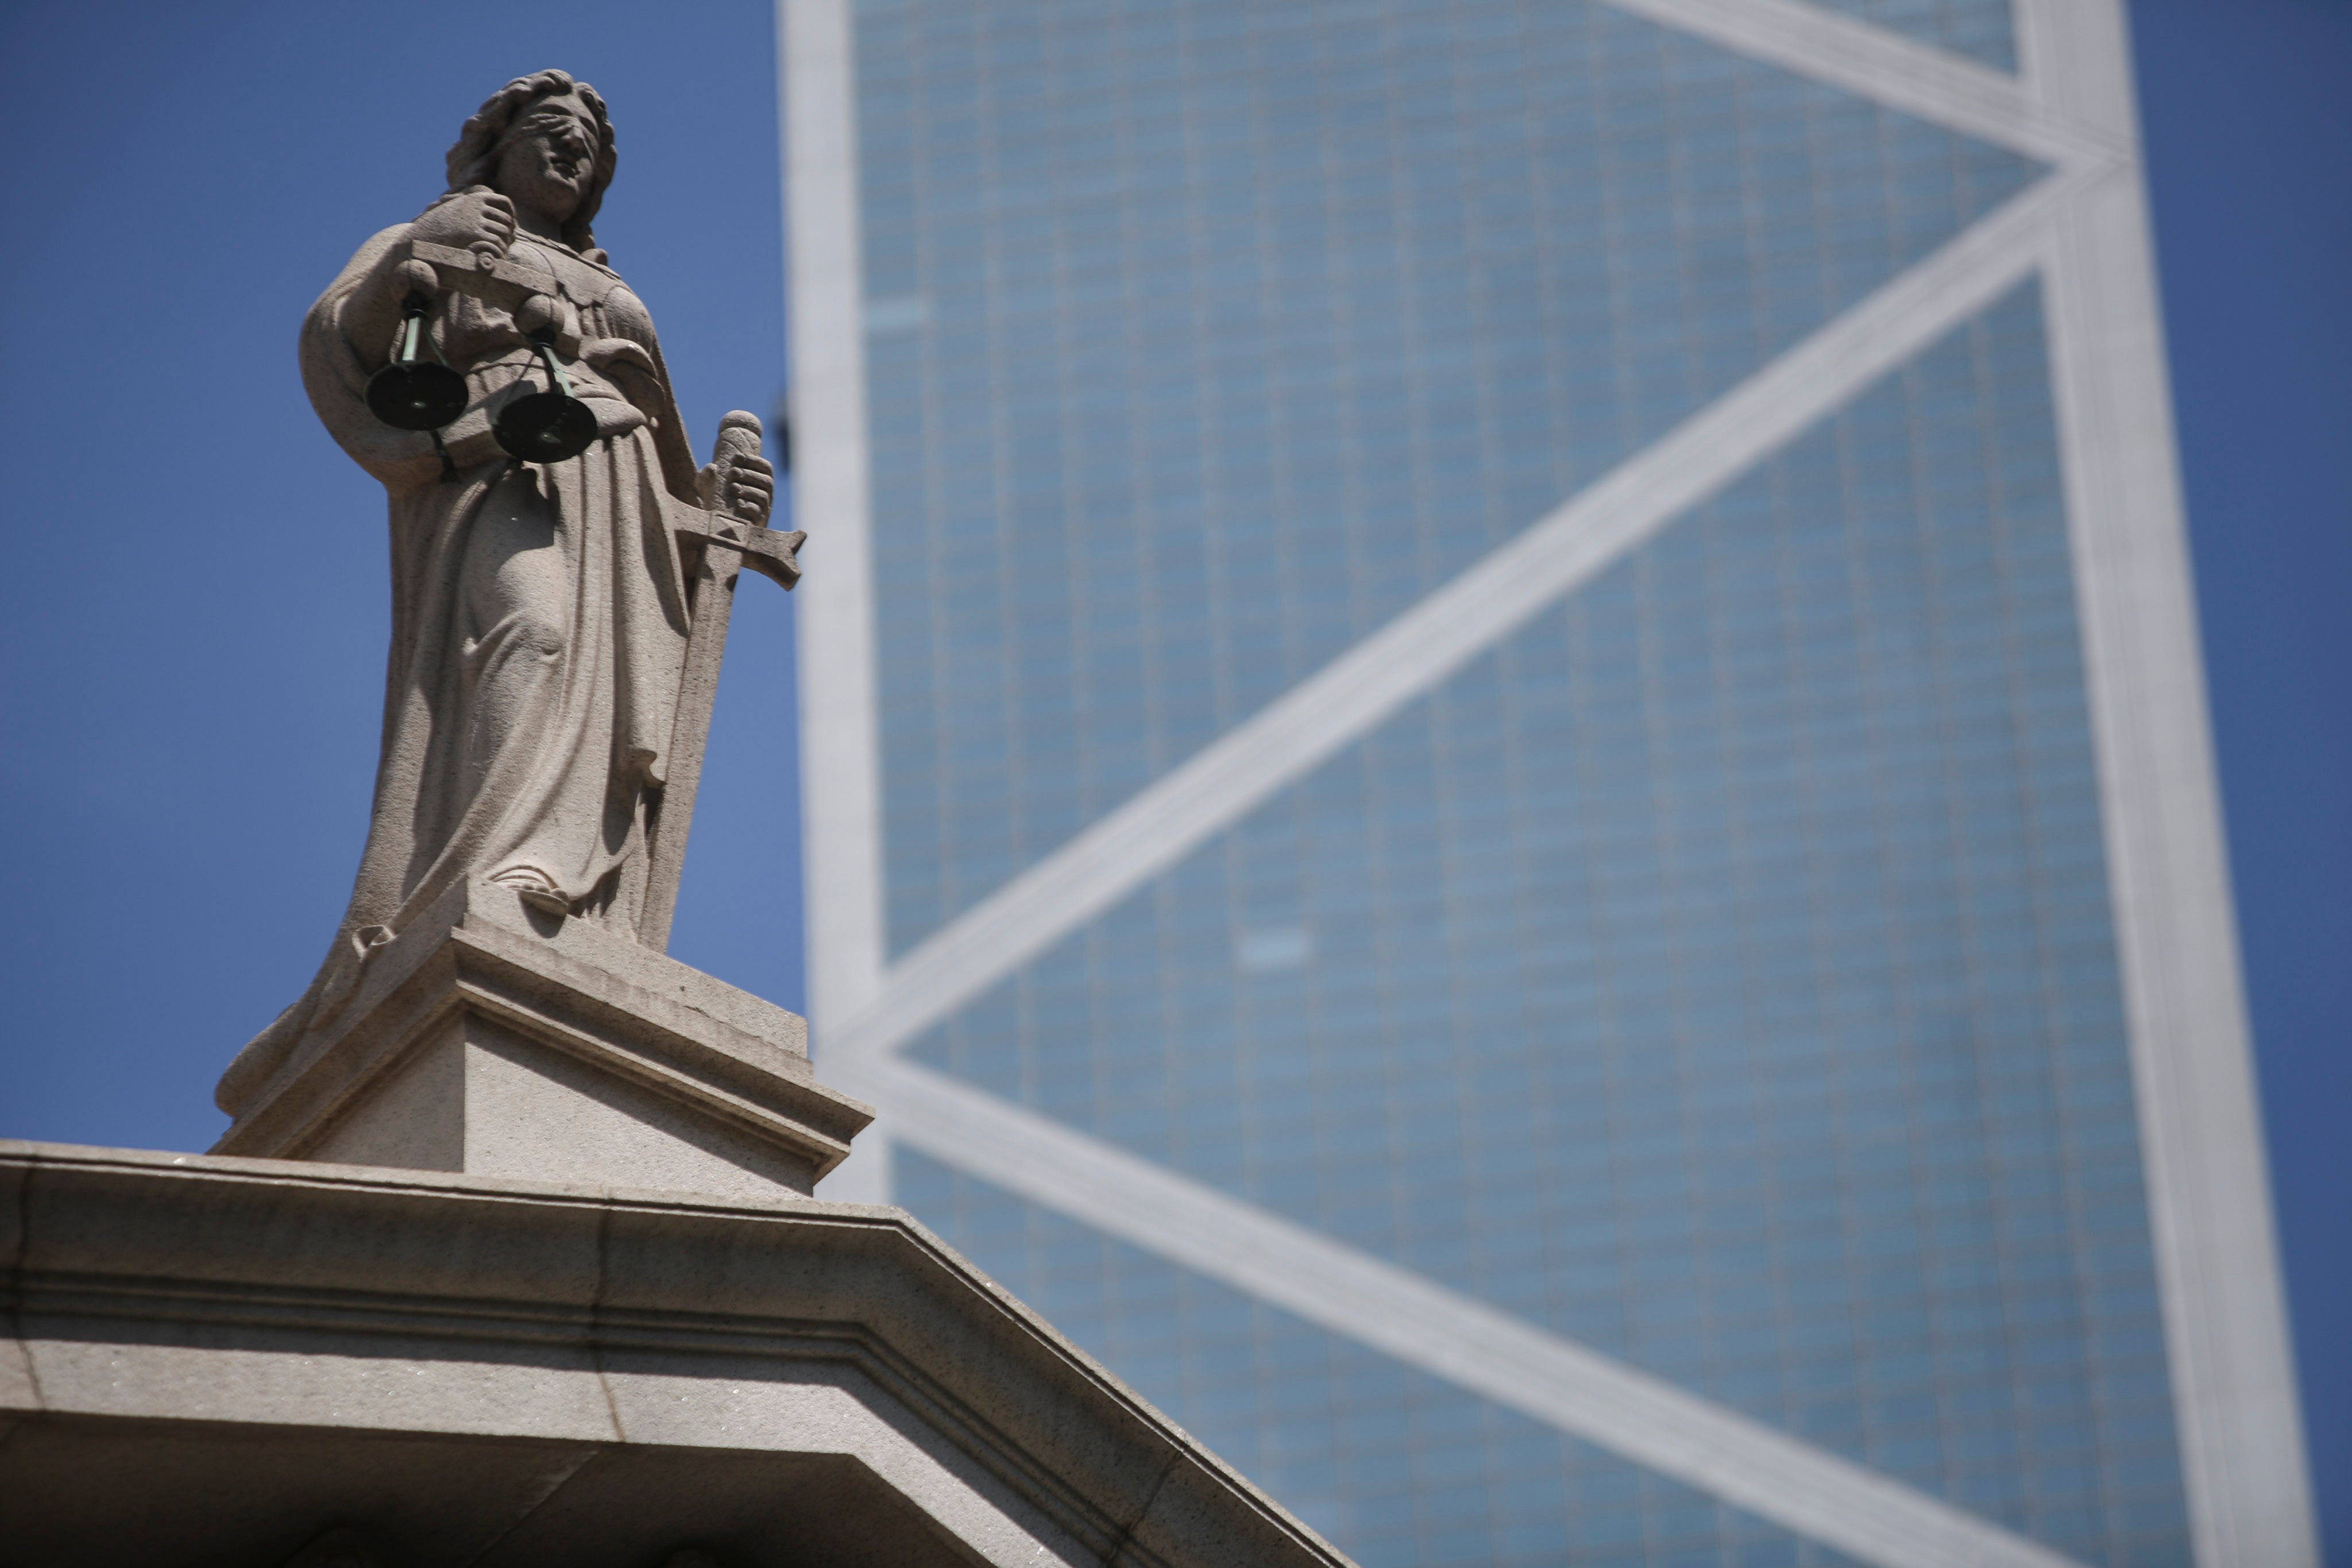 A sculpture of the Goddess of Justice at the Court of Final Appeal in Hong Kong’s Central. Photo: Sam Tsang